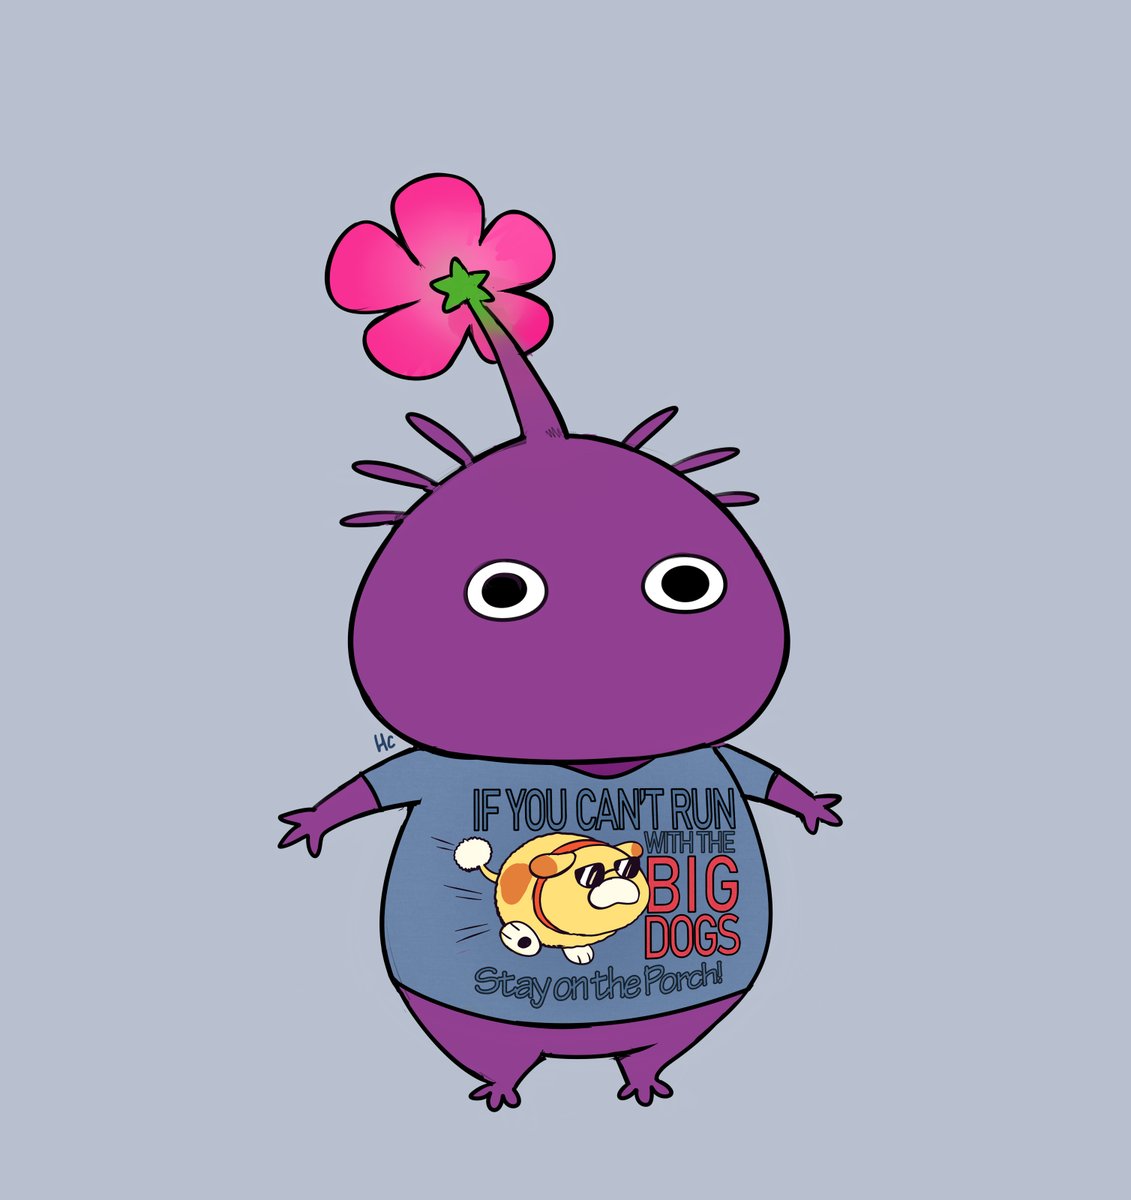 Purple Pikmin has returned from the mall